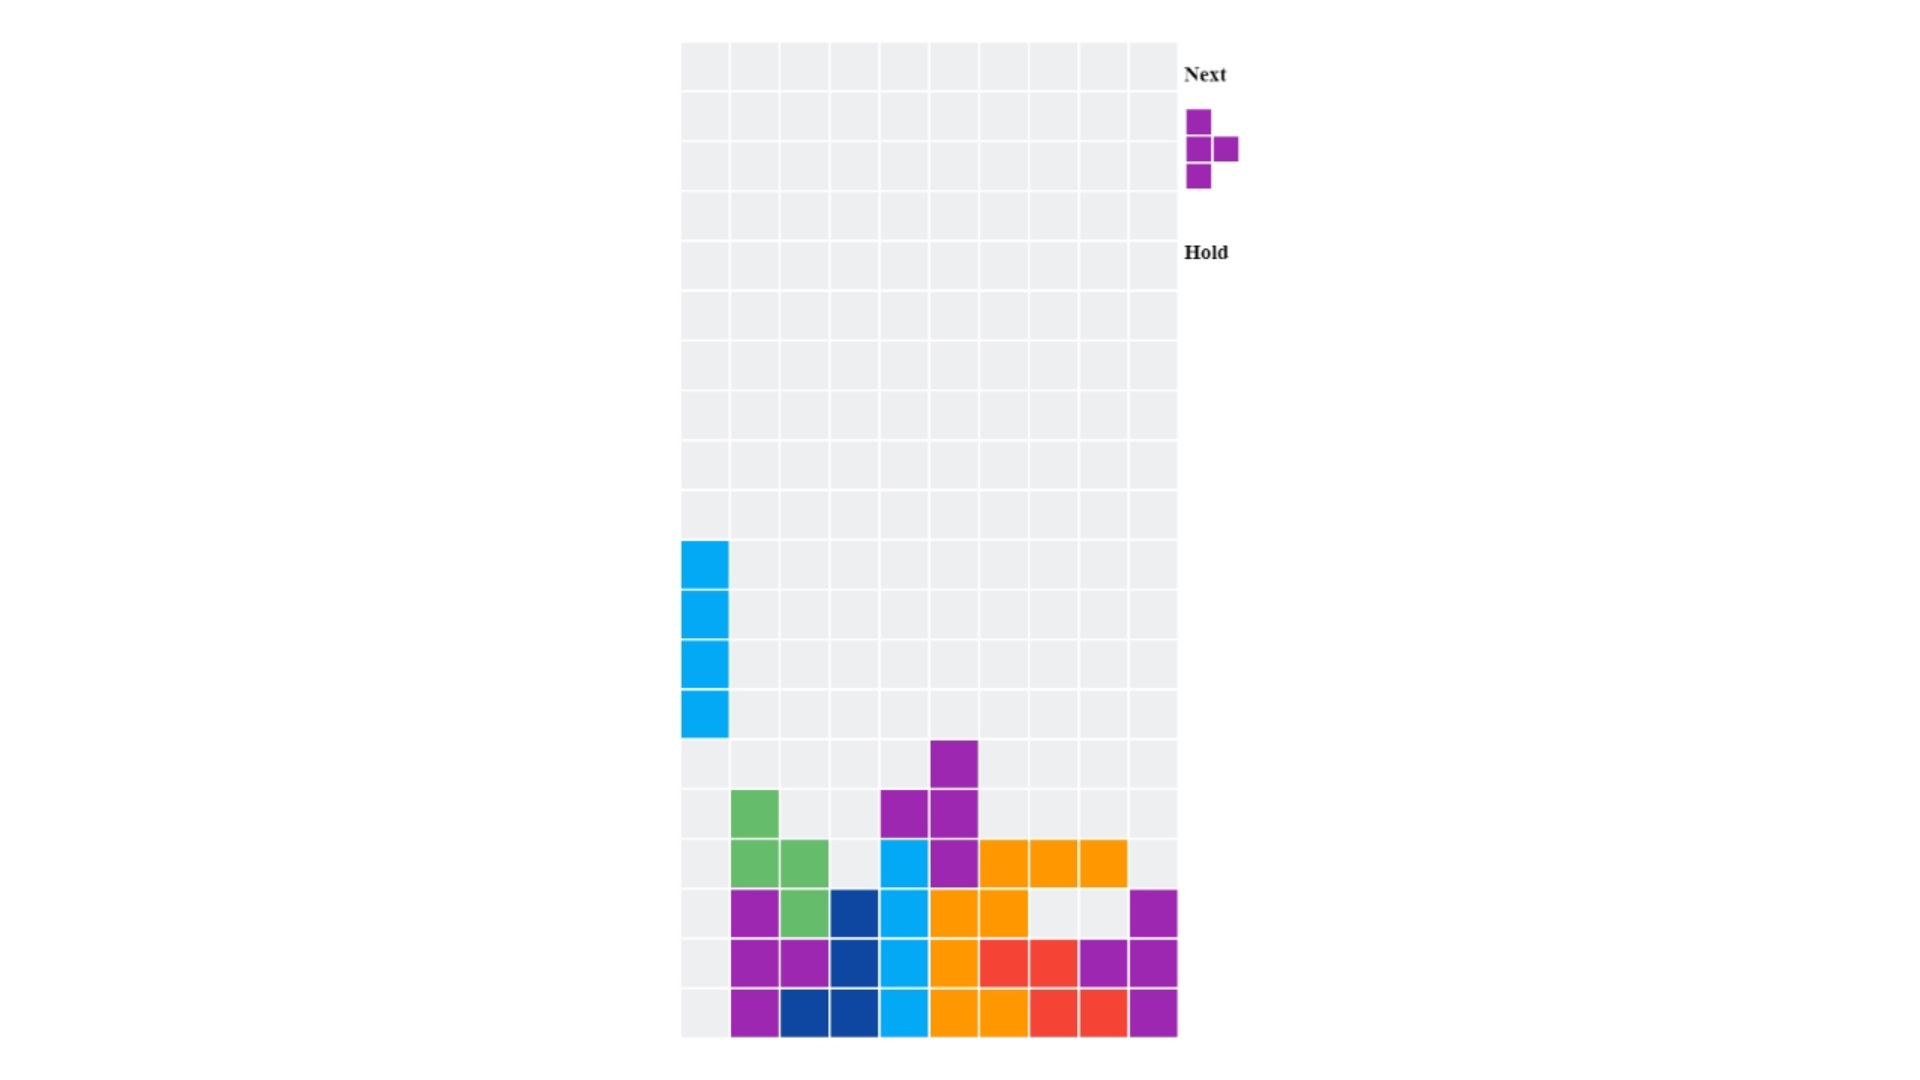 An in progress board from a game of Tetris. A line piece is about to fall into a well on the left side of the board, only clearing the bottom two lines. The next piece shown will be a T piece, and there is no piece being held in reserve.